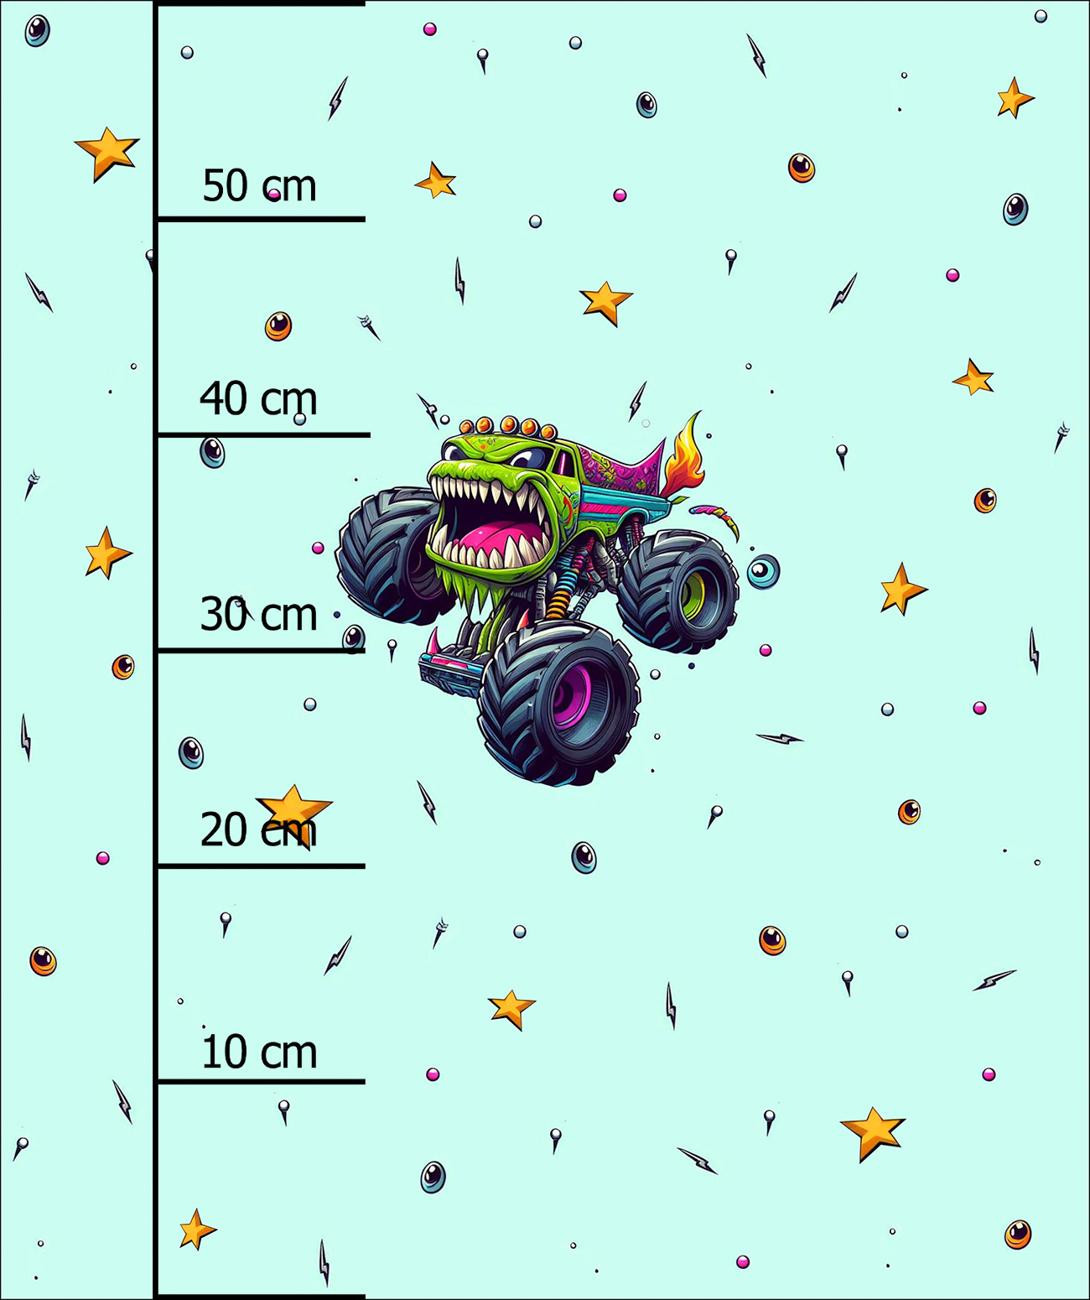 MONSTER TRUCK PAT. 3 -  PANEL (60cm x 50cm) brushed knitwear with elastane ITY